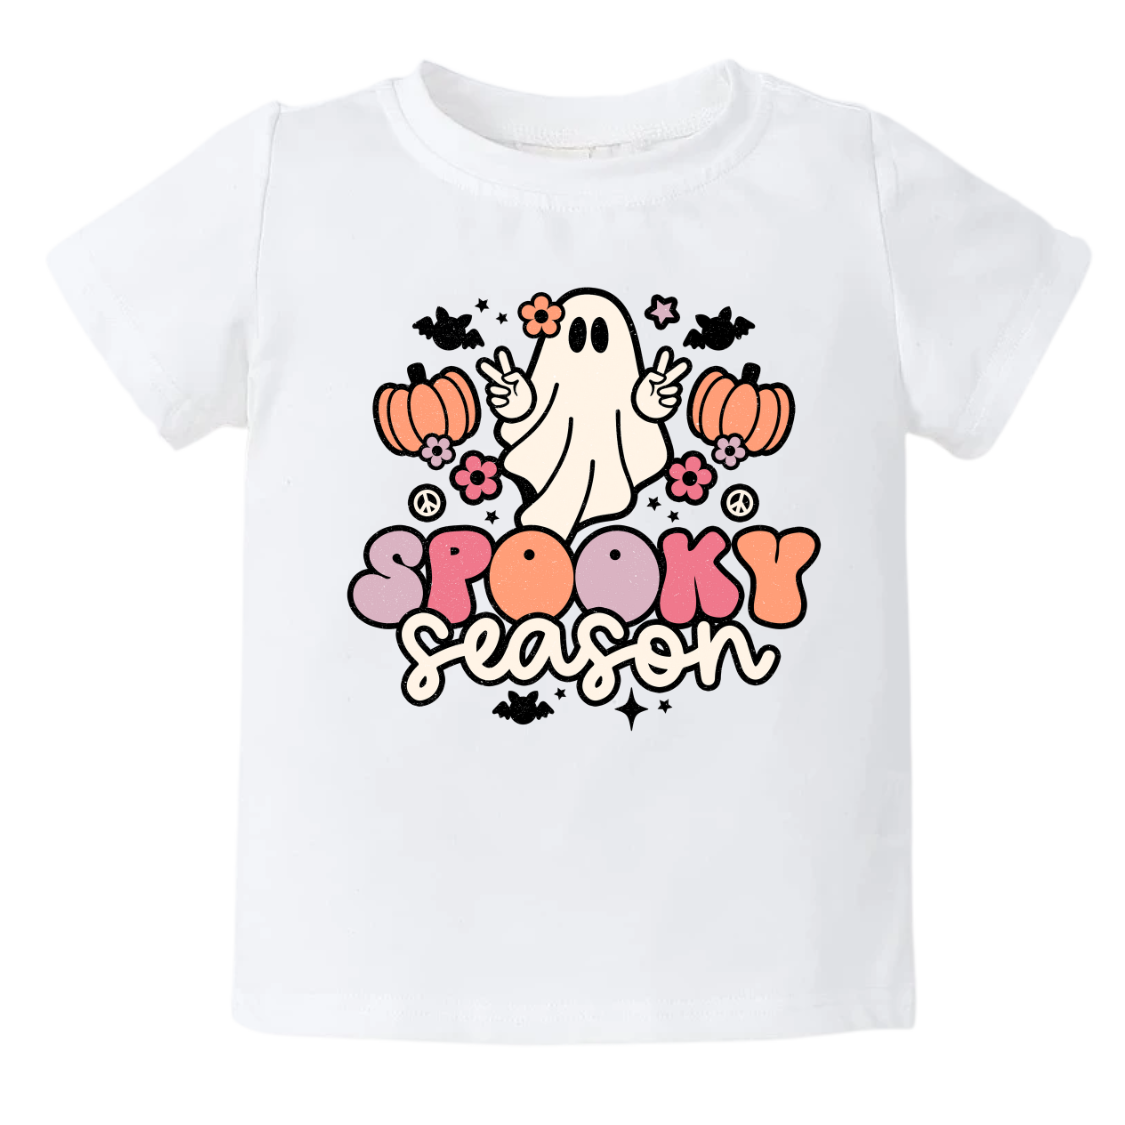 Kids' t-shirt with a cute ghost graphic and the text 'Spooky Season.' Perfect for Halloween outfits and festivities. Shop now and let your little one embrace the spirit of Halloween with this fun and festive tee!